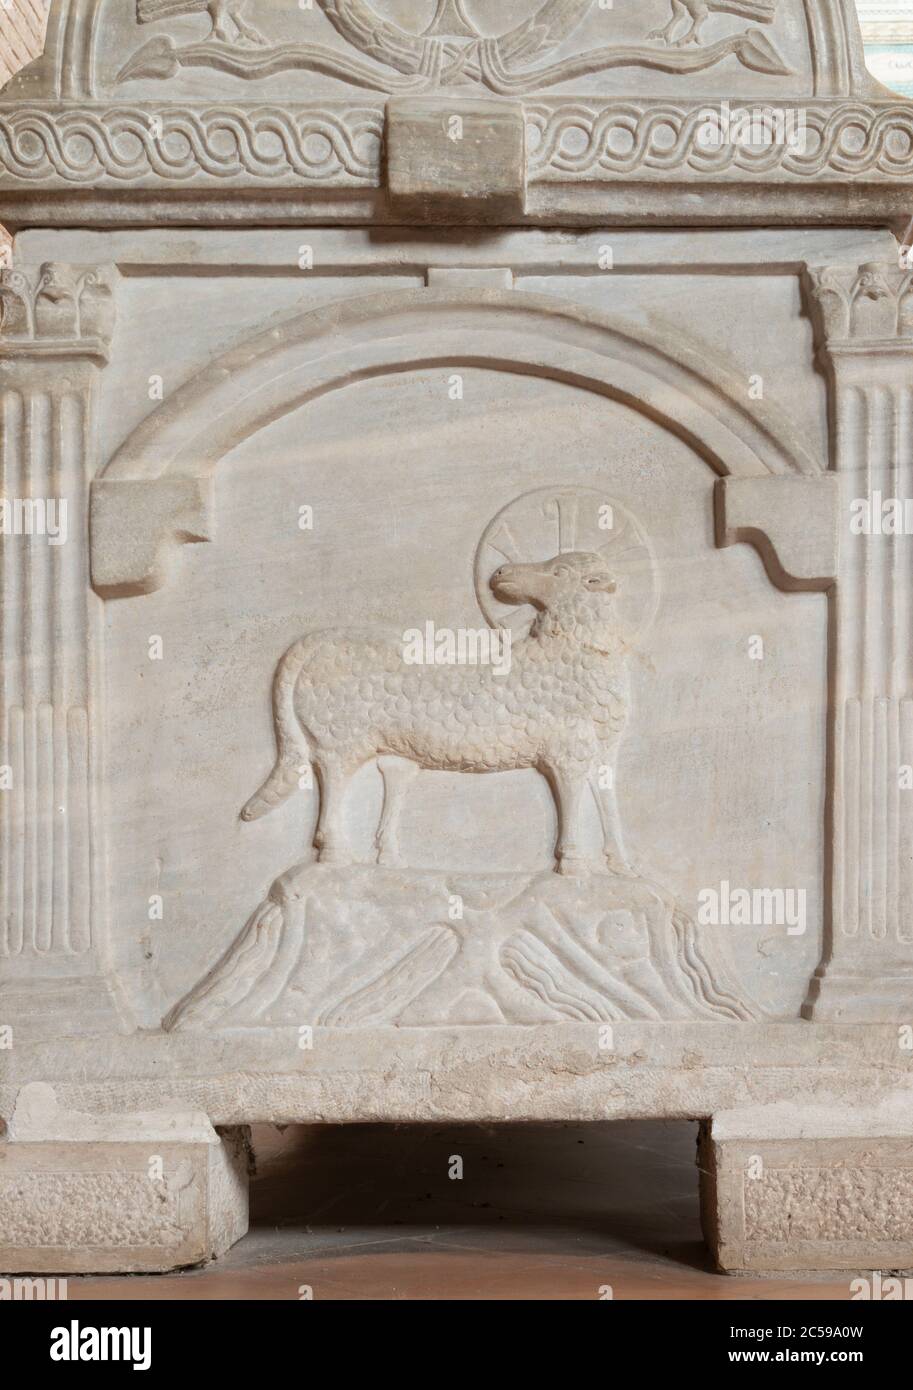 RAVENNA, ITALY - JANUARY 29, 2020: The detail of early christian tomb in the church Basilica of Sant Apolinare in Classe with Lamb of God symbolic. Stock Photo